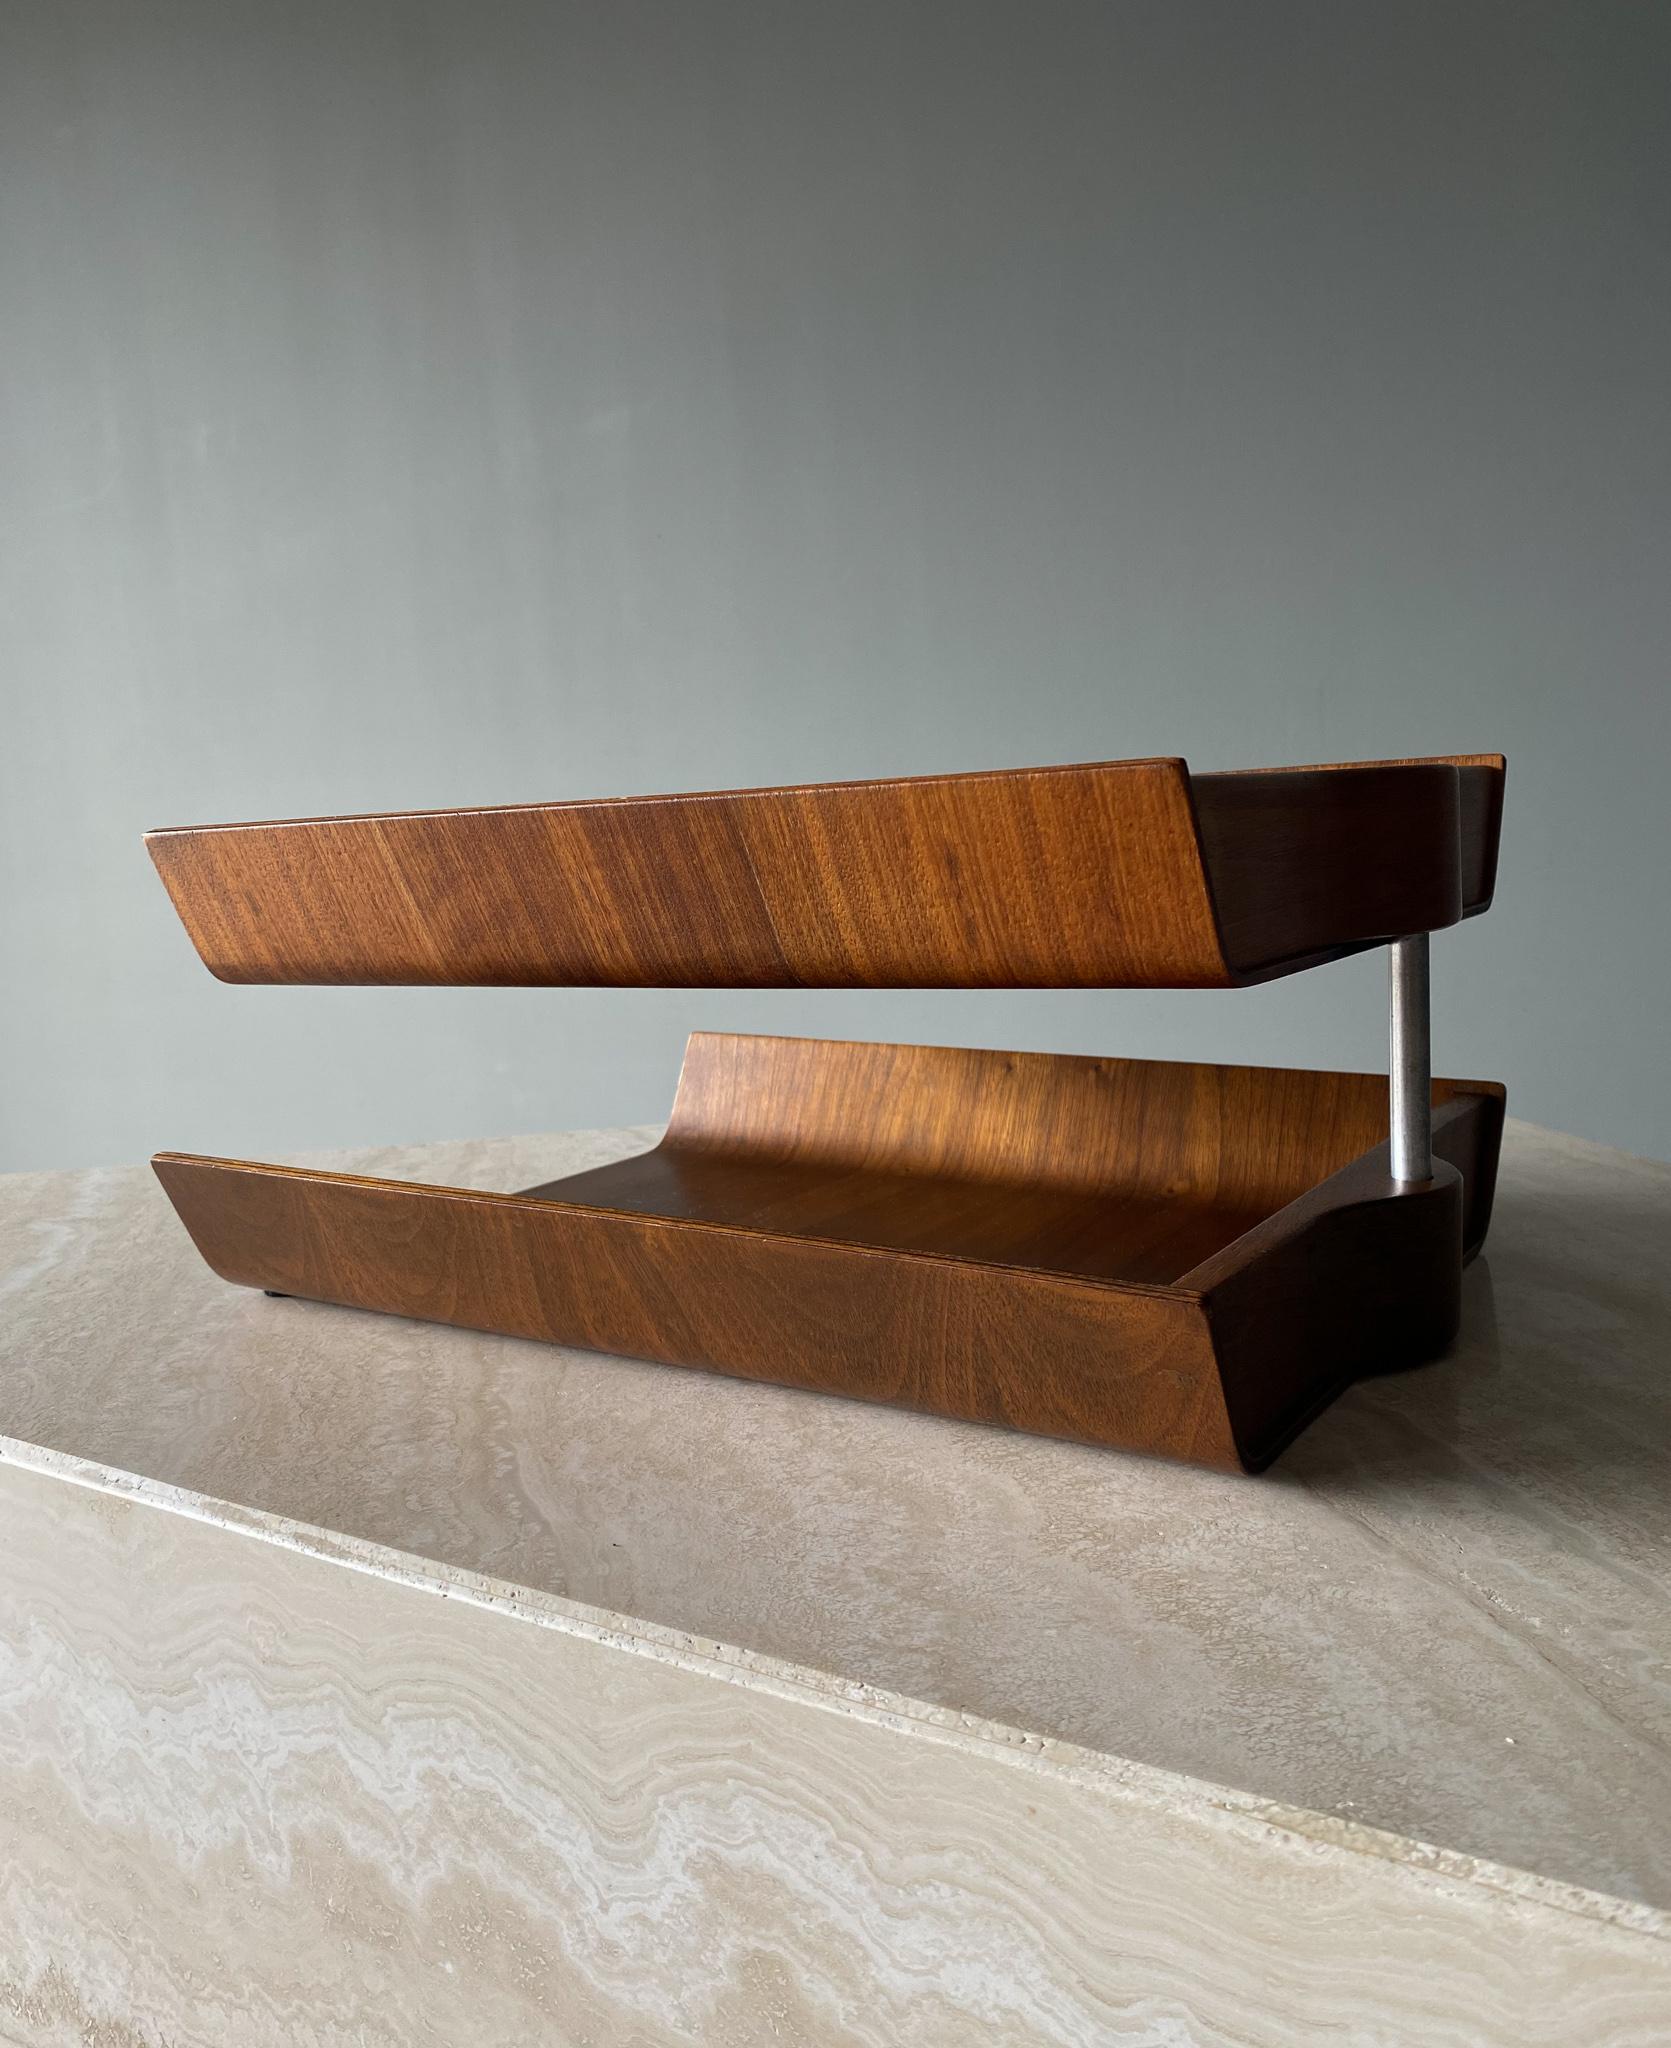 Florence Knoll Molded Plywood Architectural Letter Tray, 1960s For Sale 1